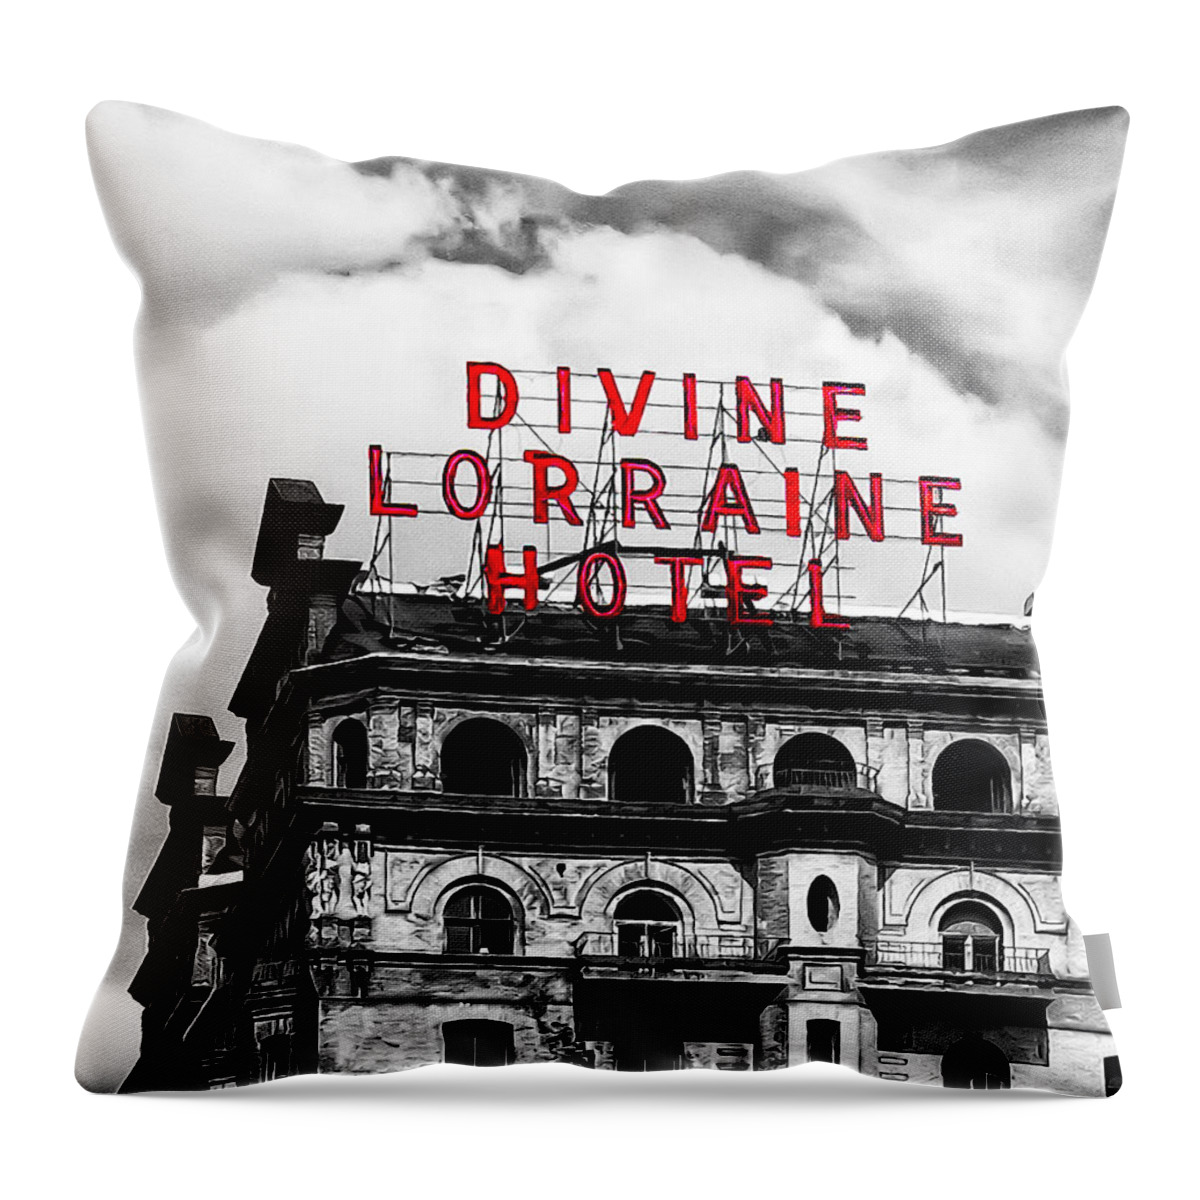 Divine Lorraine Hotel Marquee Throw Pillow featuring the photograph Divine Lorraine Hotel Marquee by Bill Cannon